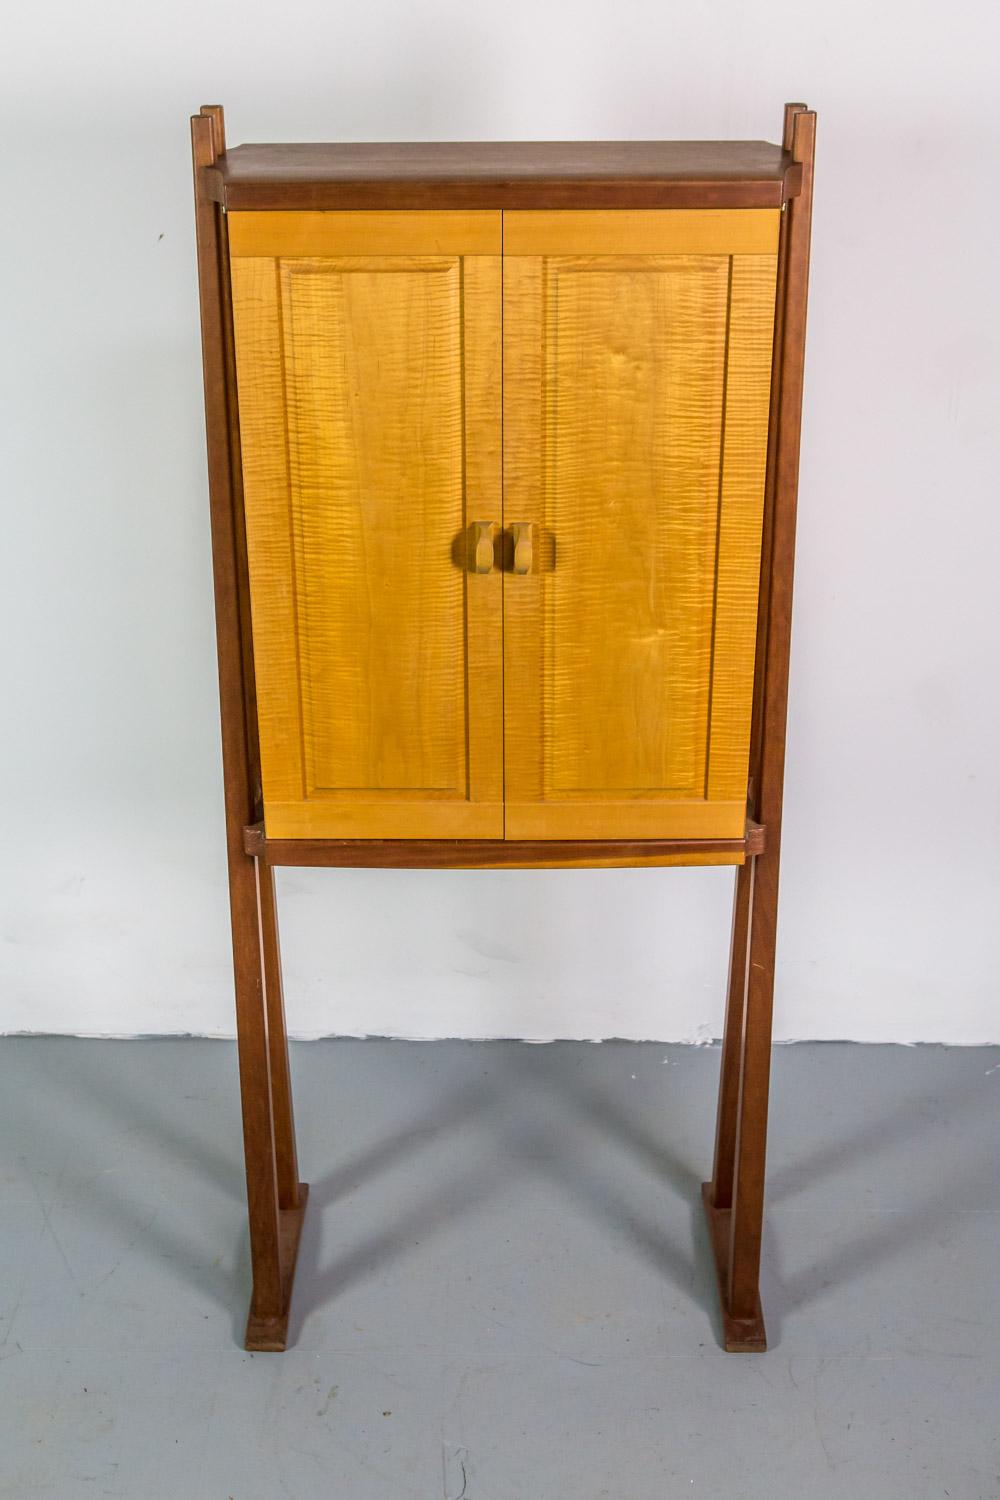 Tall studio cabinet in different woods by American Craftsman Mike Bartell 1989
Two doors and two insert shelves in glass.